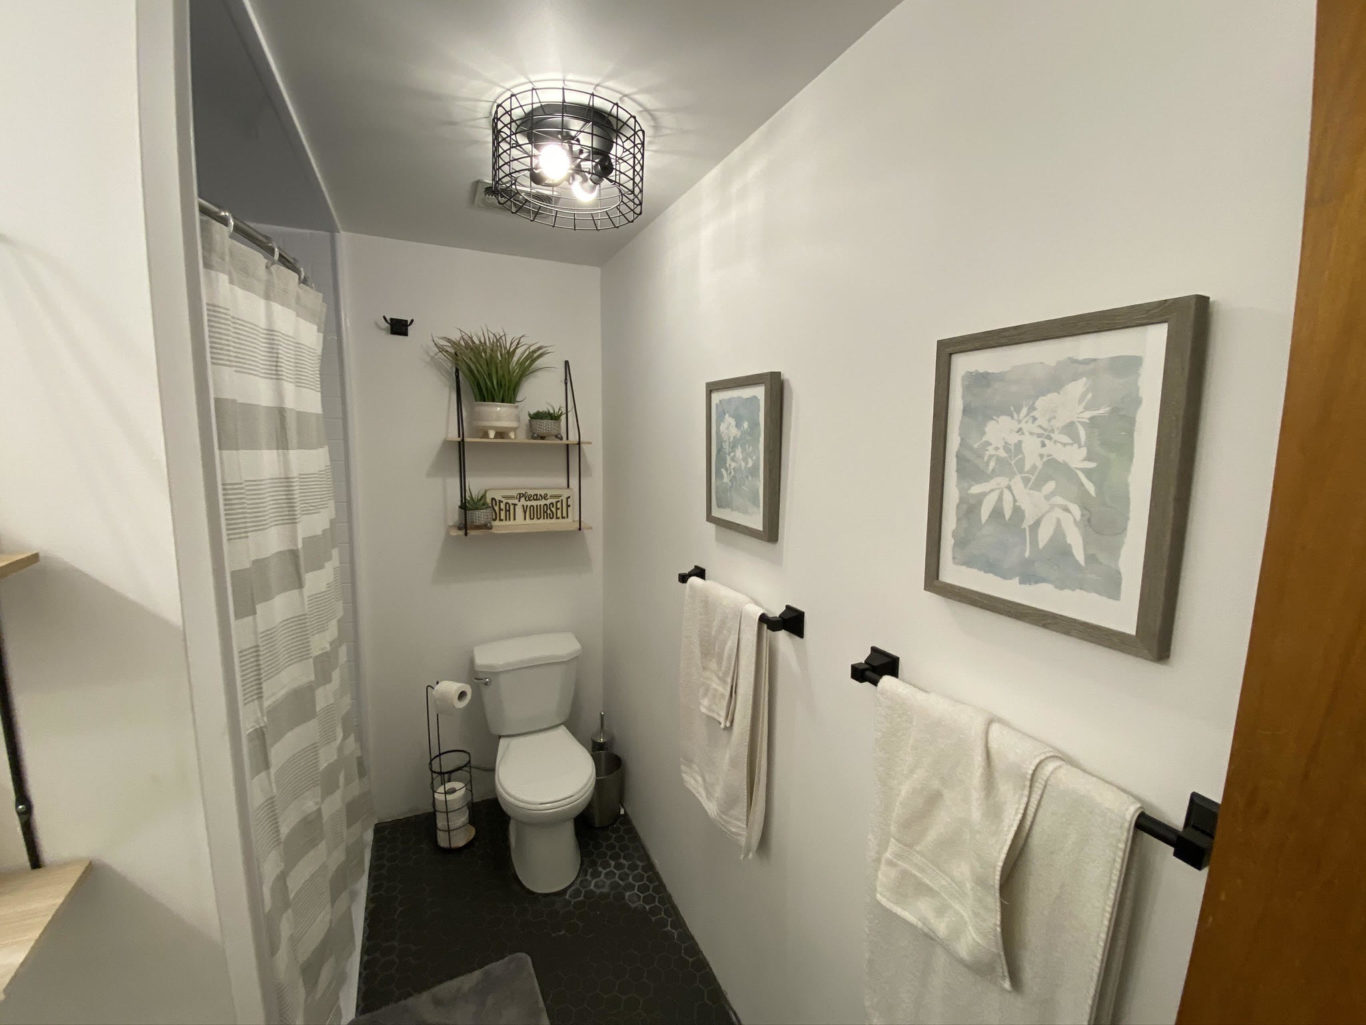 The newly renovated bathroom with black tiles, white walls, and new bathtub.